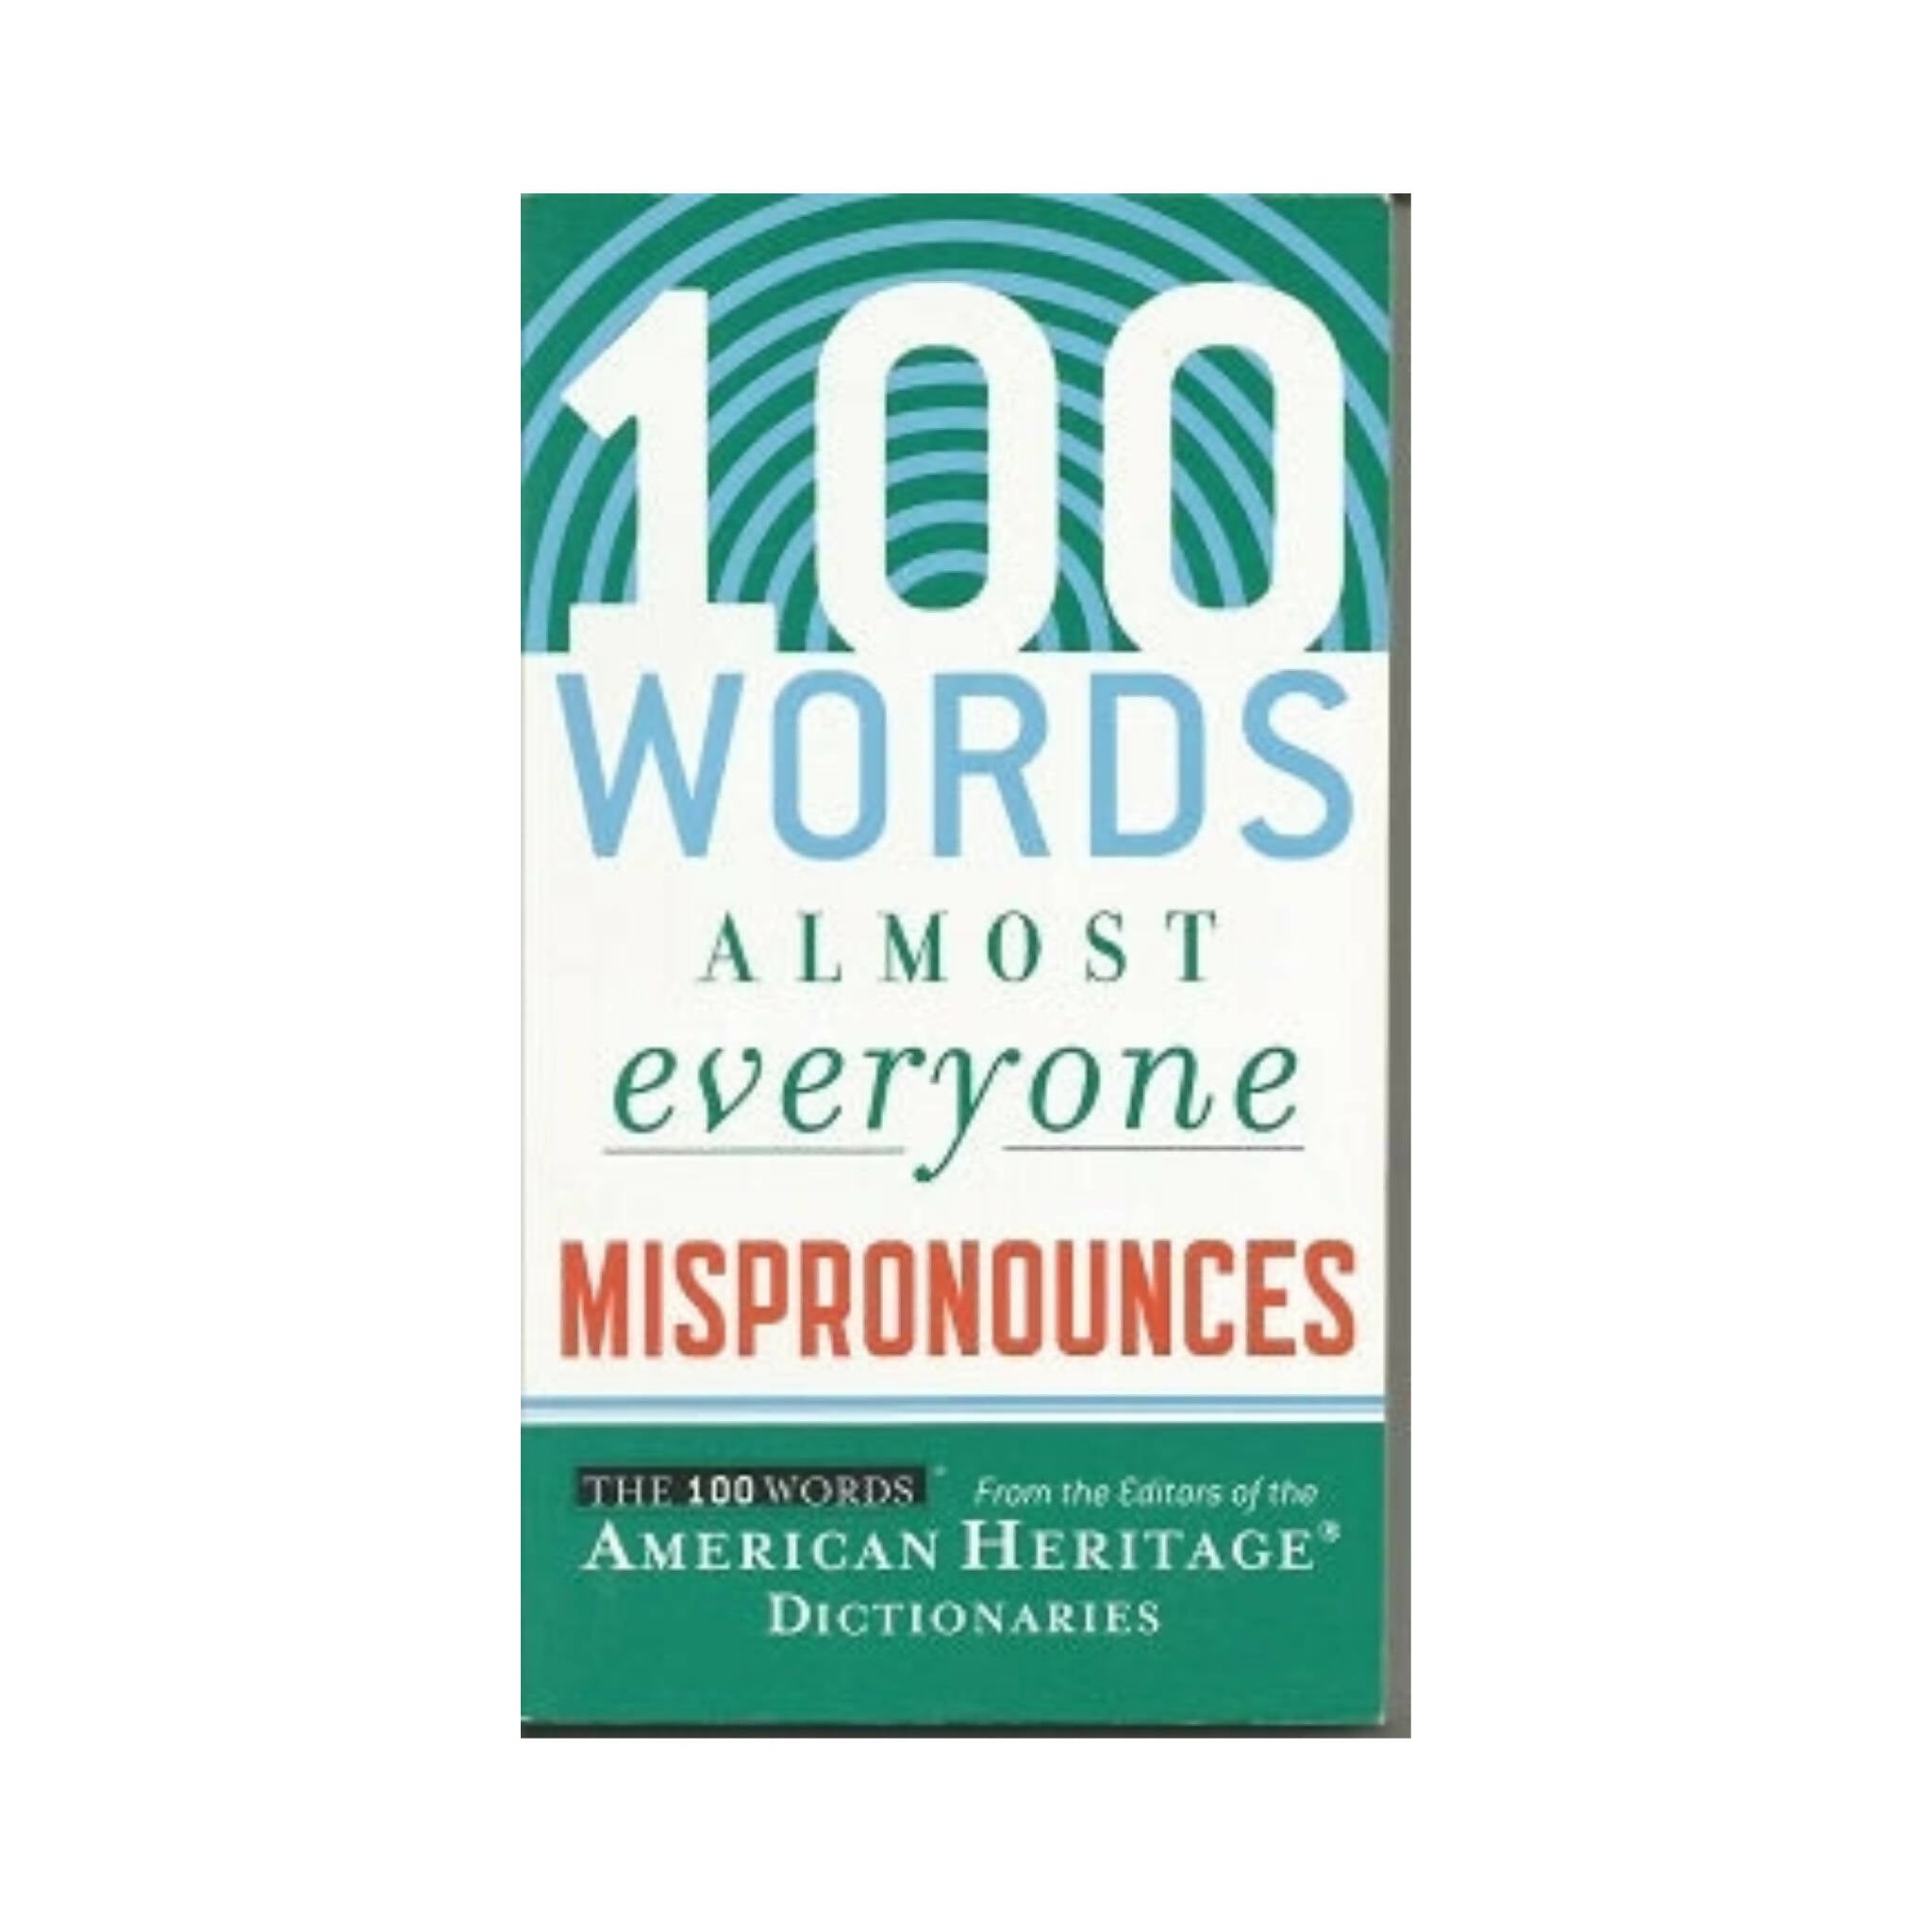 Book, One (100) Words Almost Everyone Mispronounces